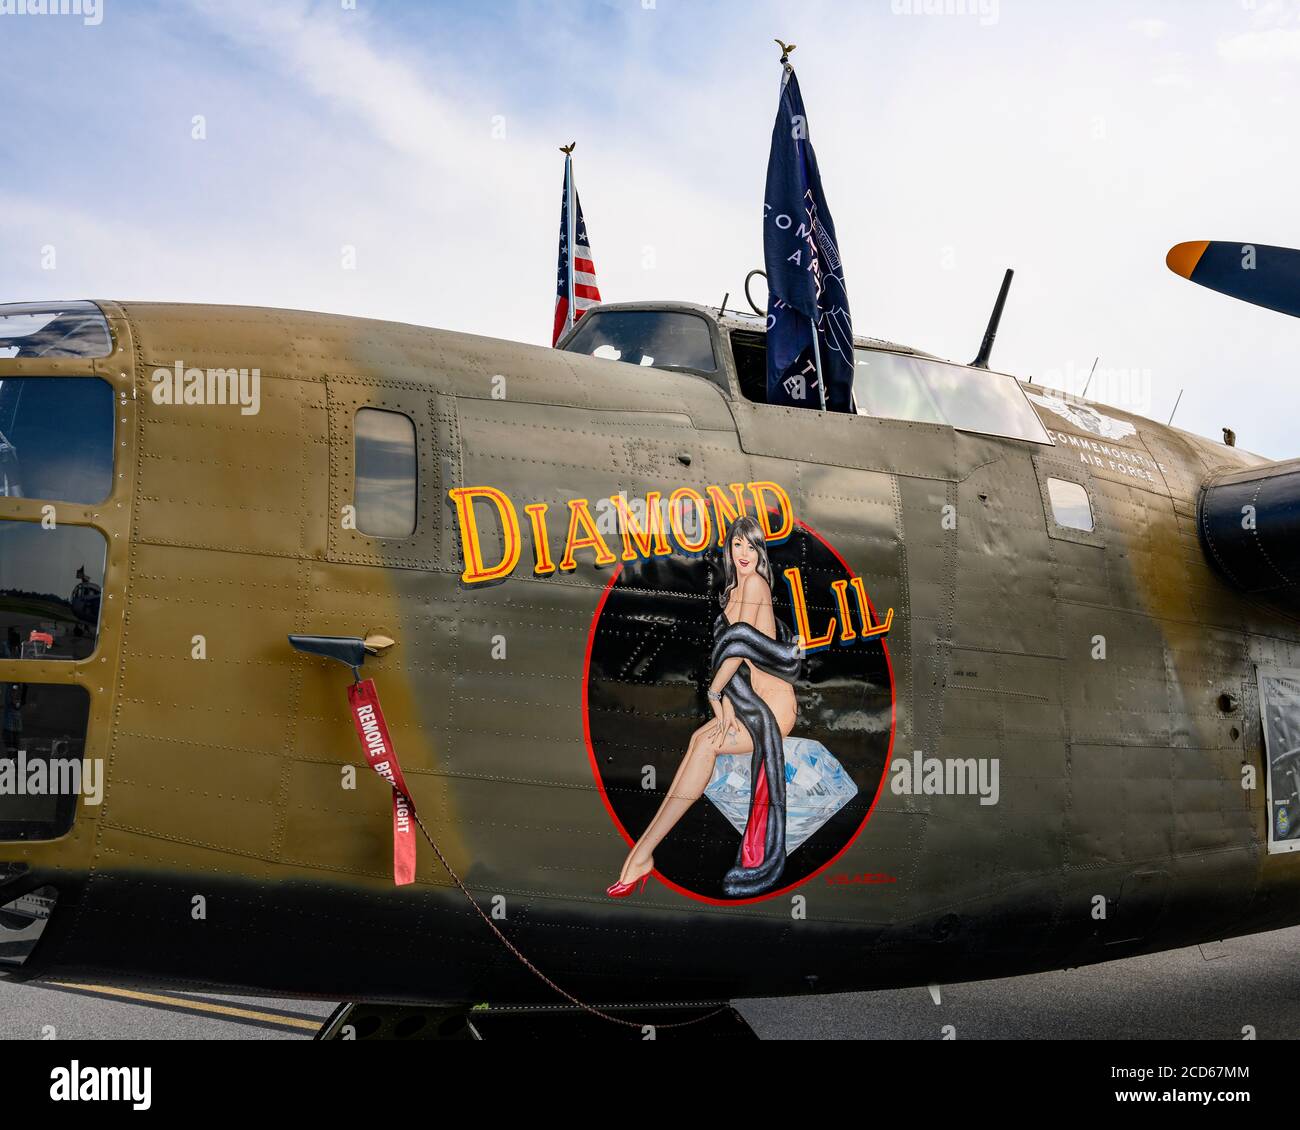 WWII or WW2 B-24 Liberator bomber, the Diamond Lil, with nose art, on display in Montgomery Alabama, USA. Stock Photo